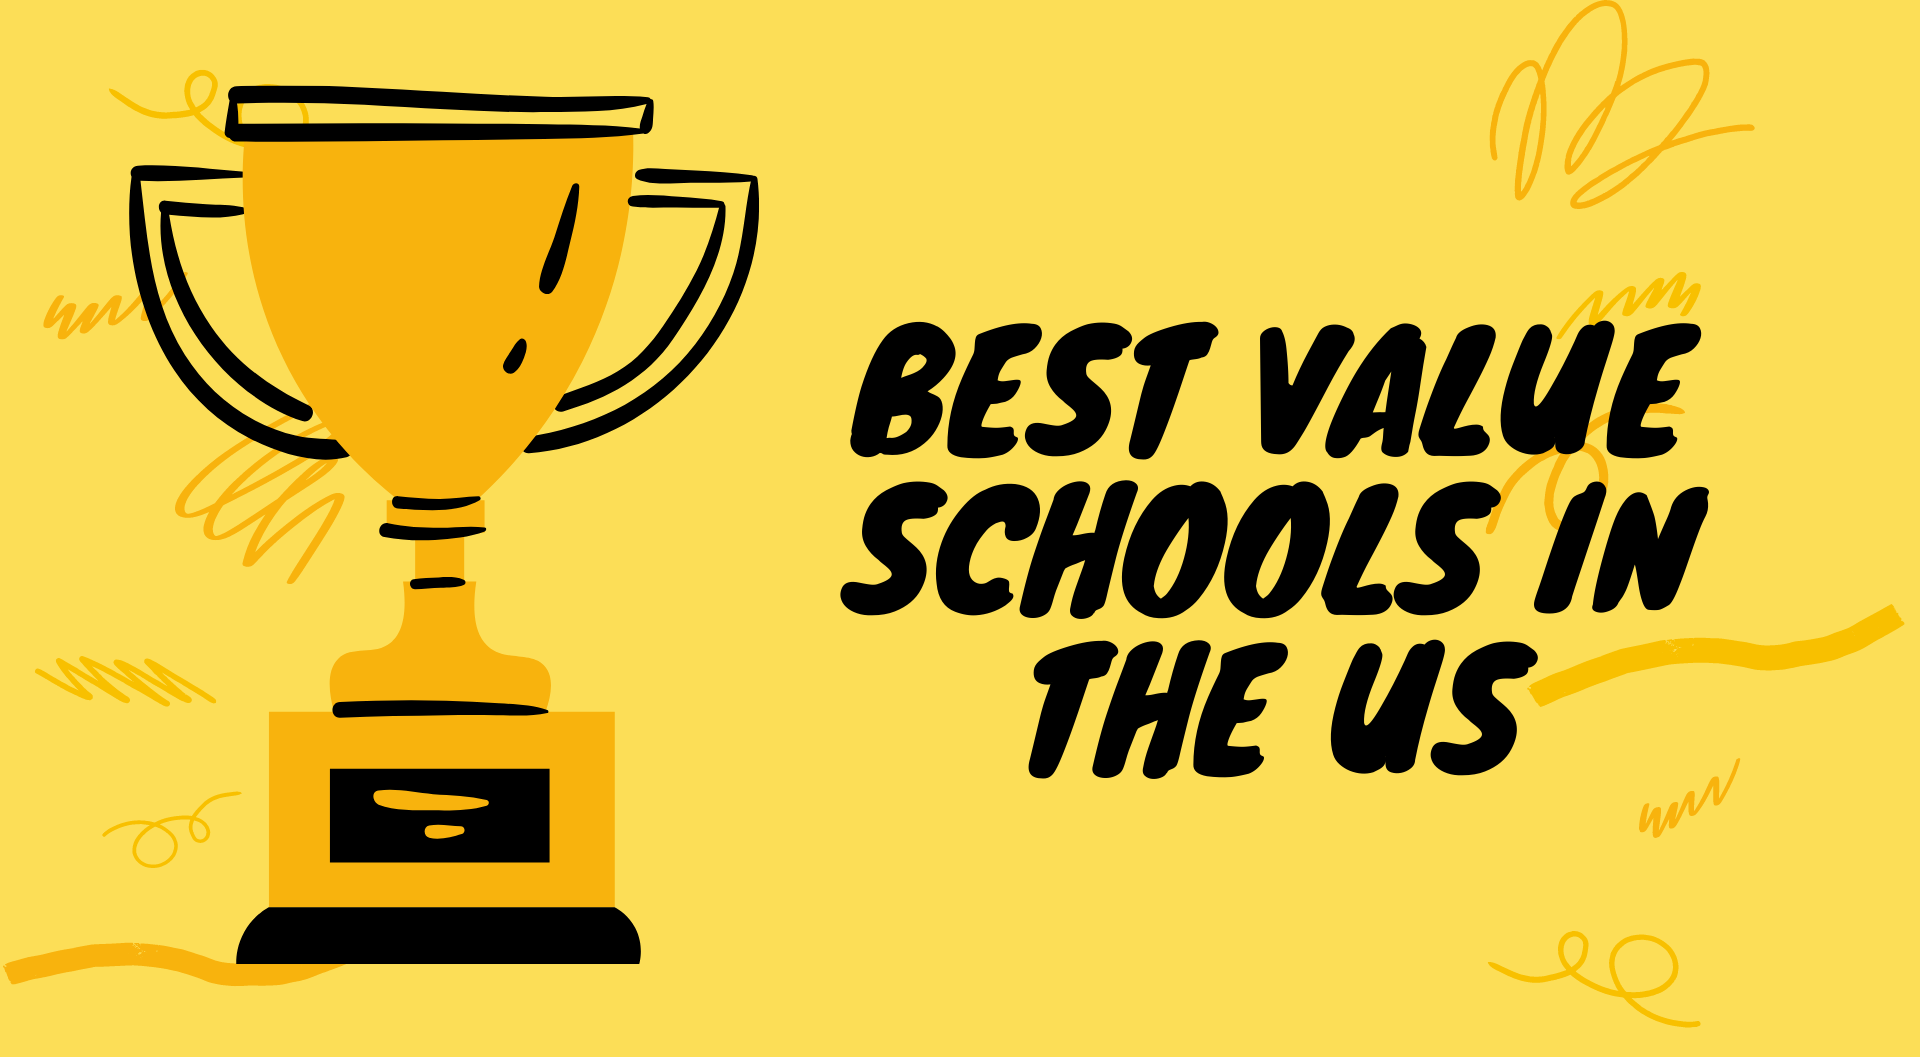 Best Value Schools in the US